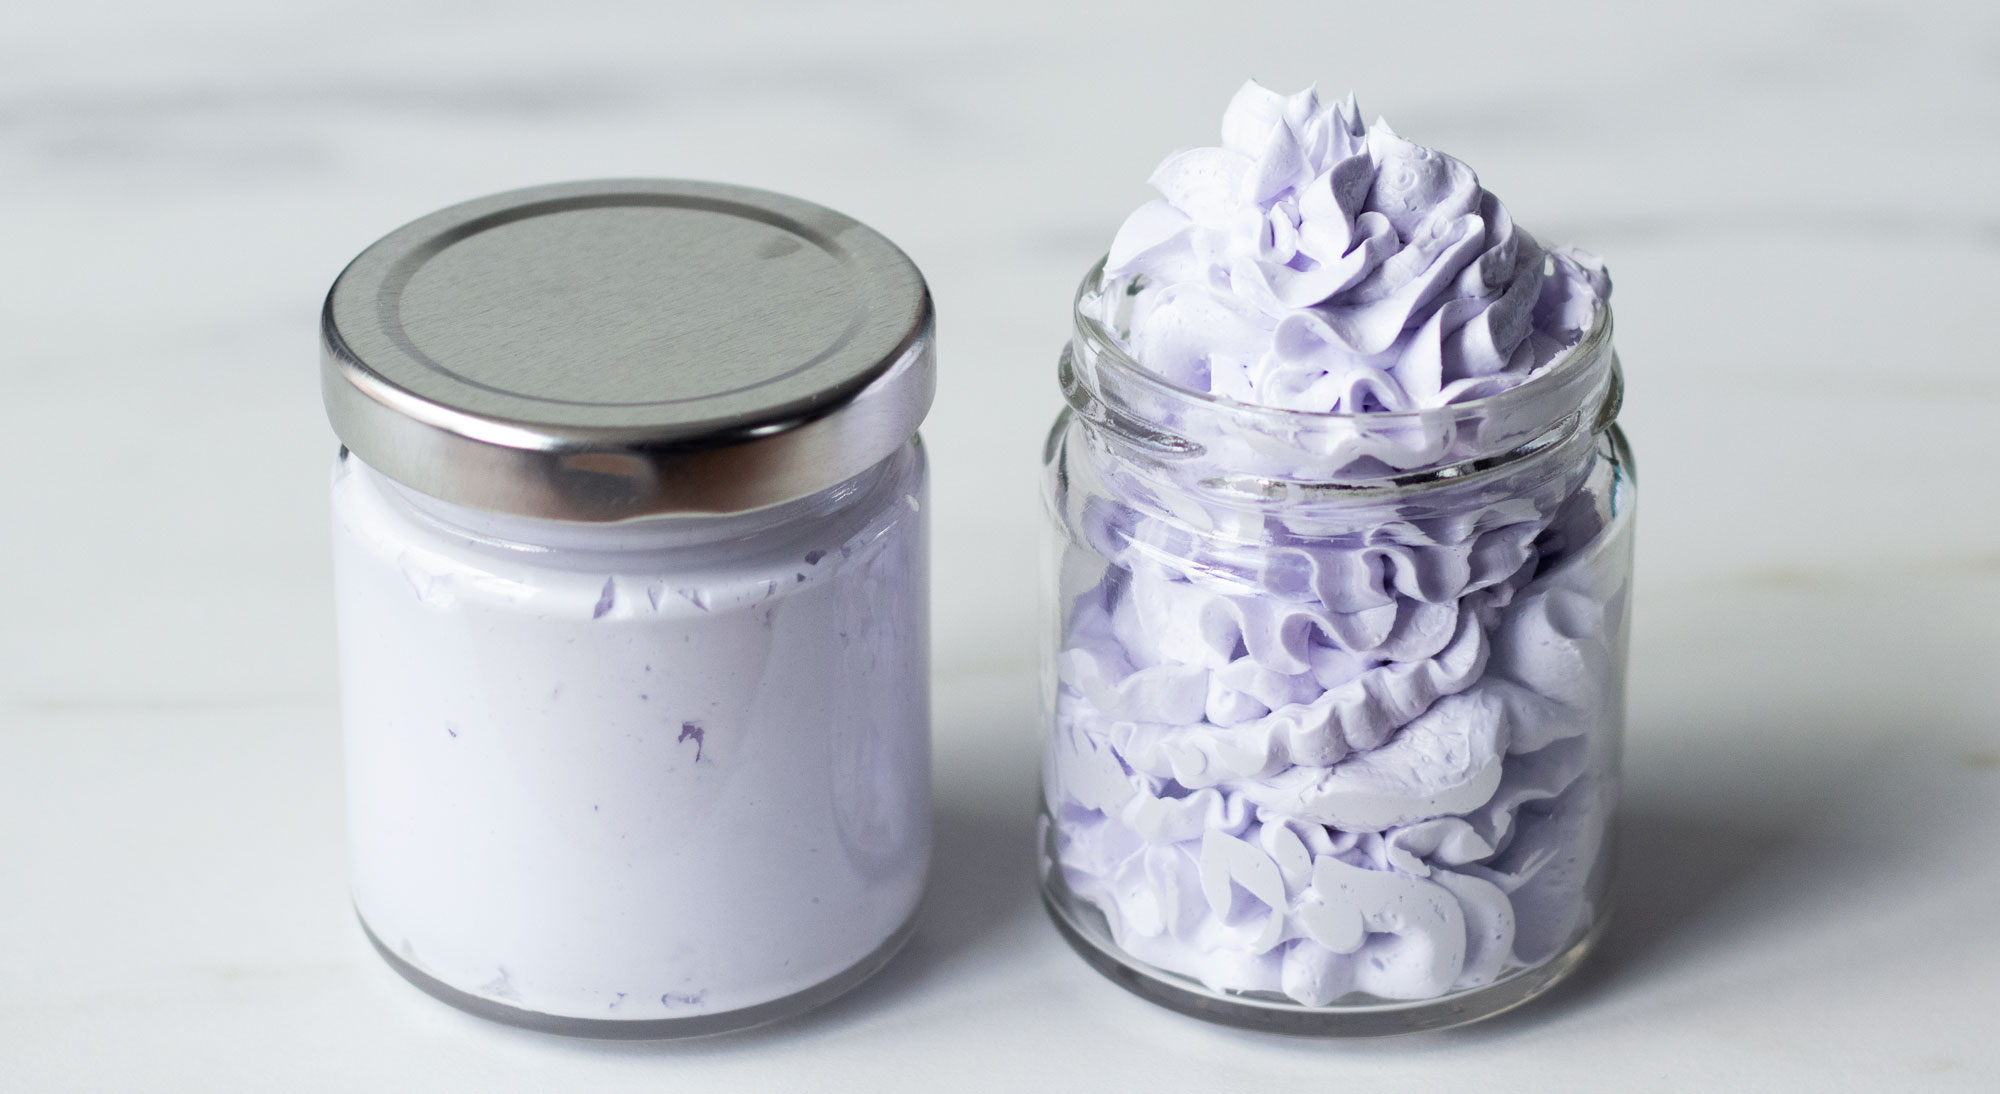 Whipped bath soap in jars.